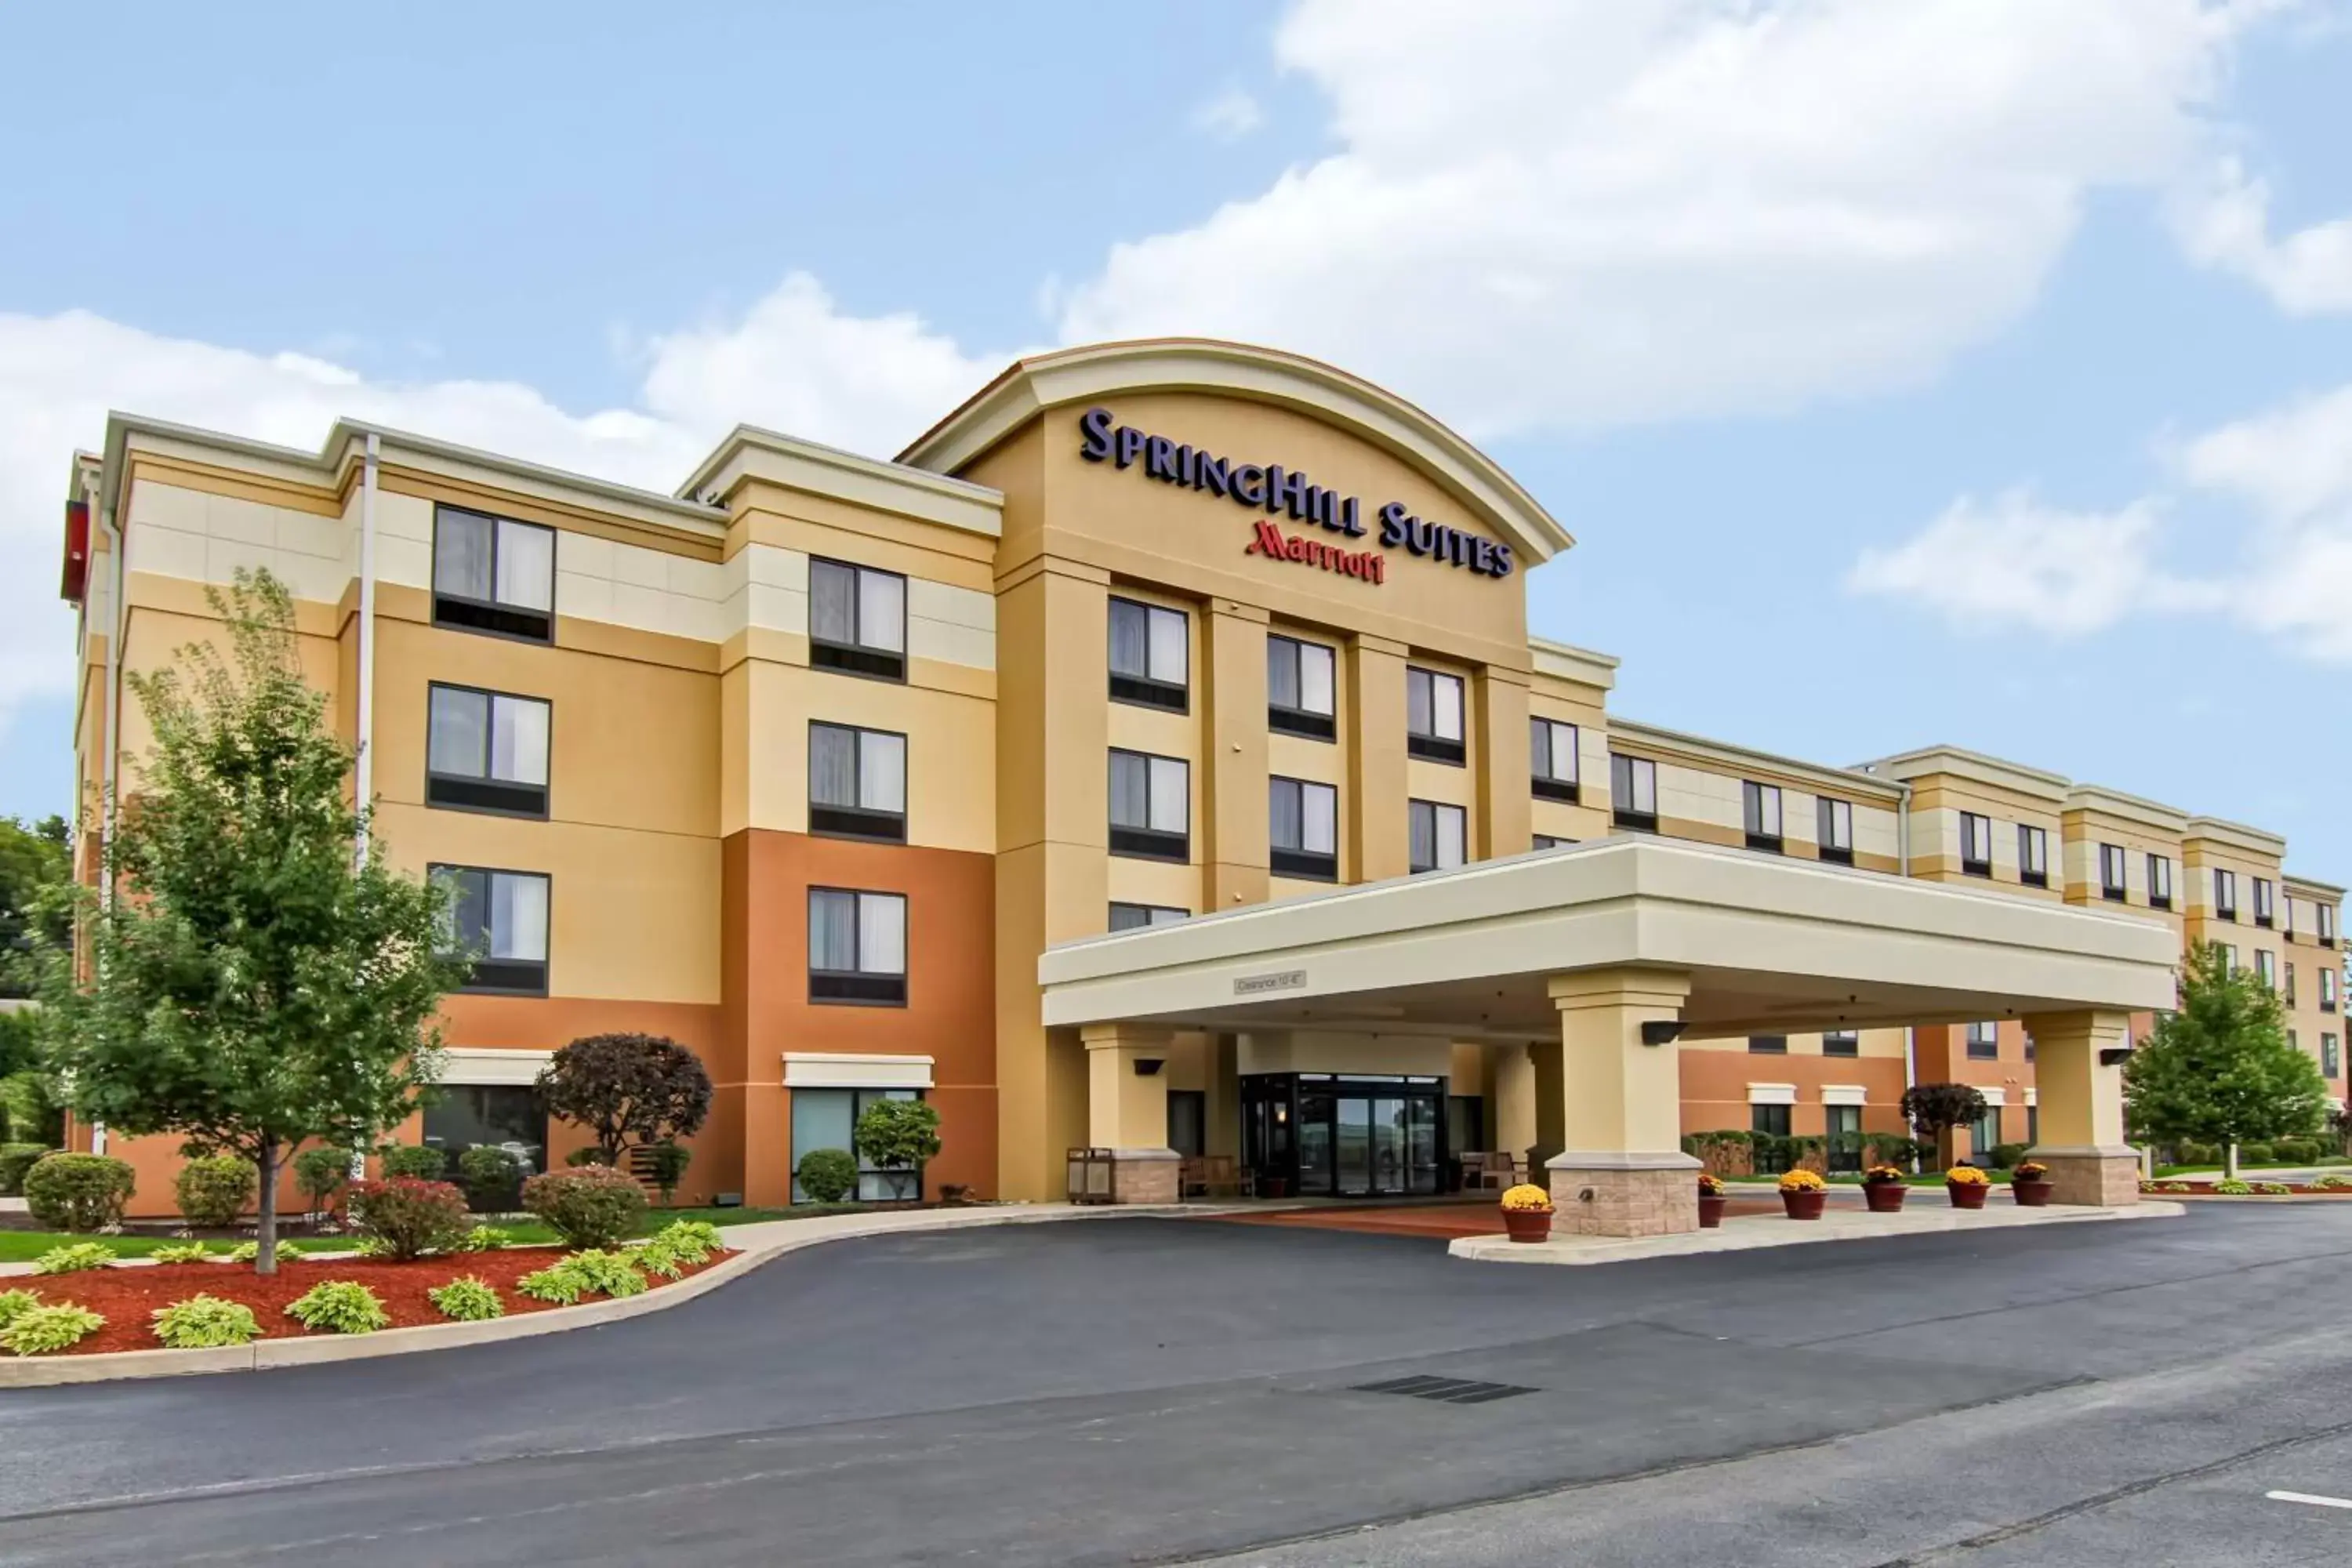 Property Building in SpringHill Suites Erie